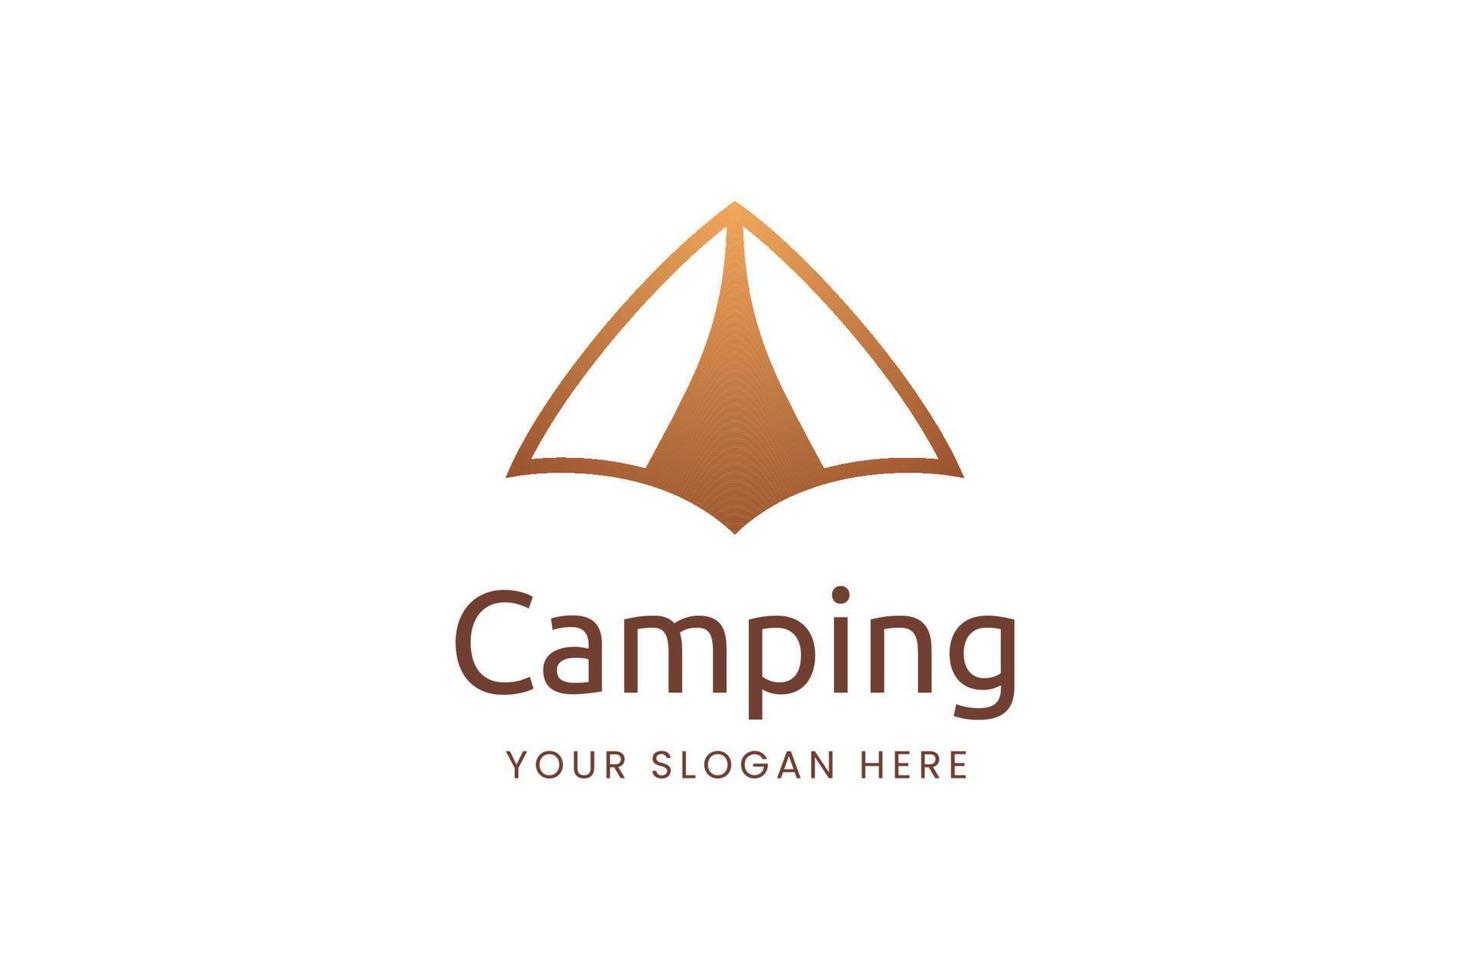 Simple camping logo with tent shape vector